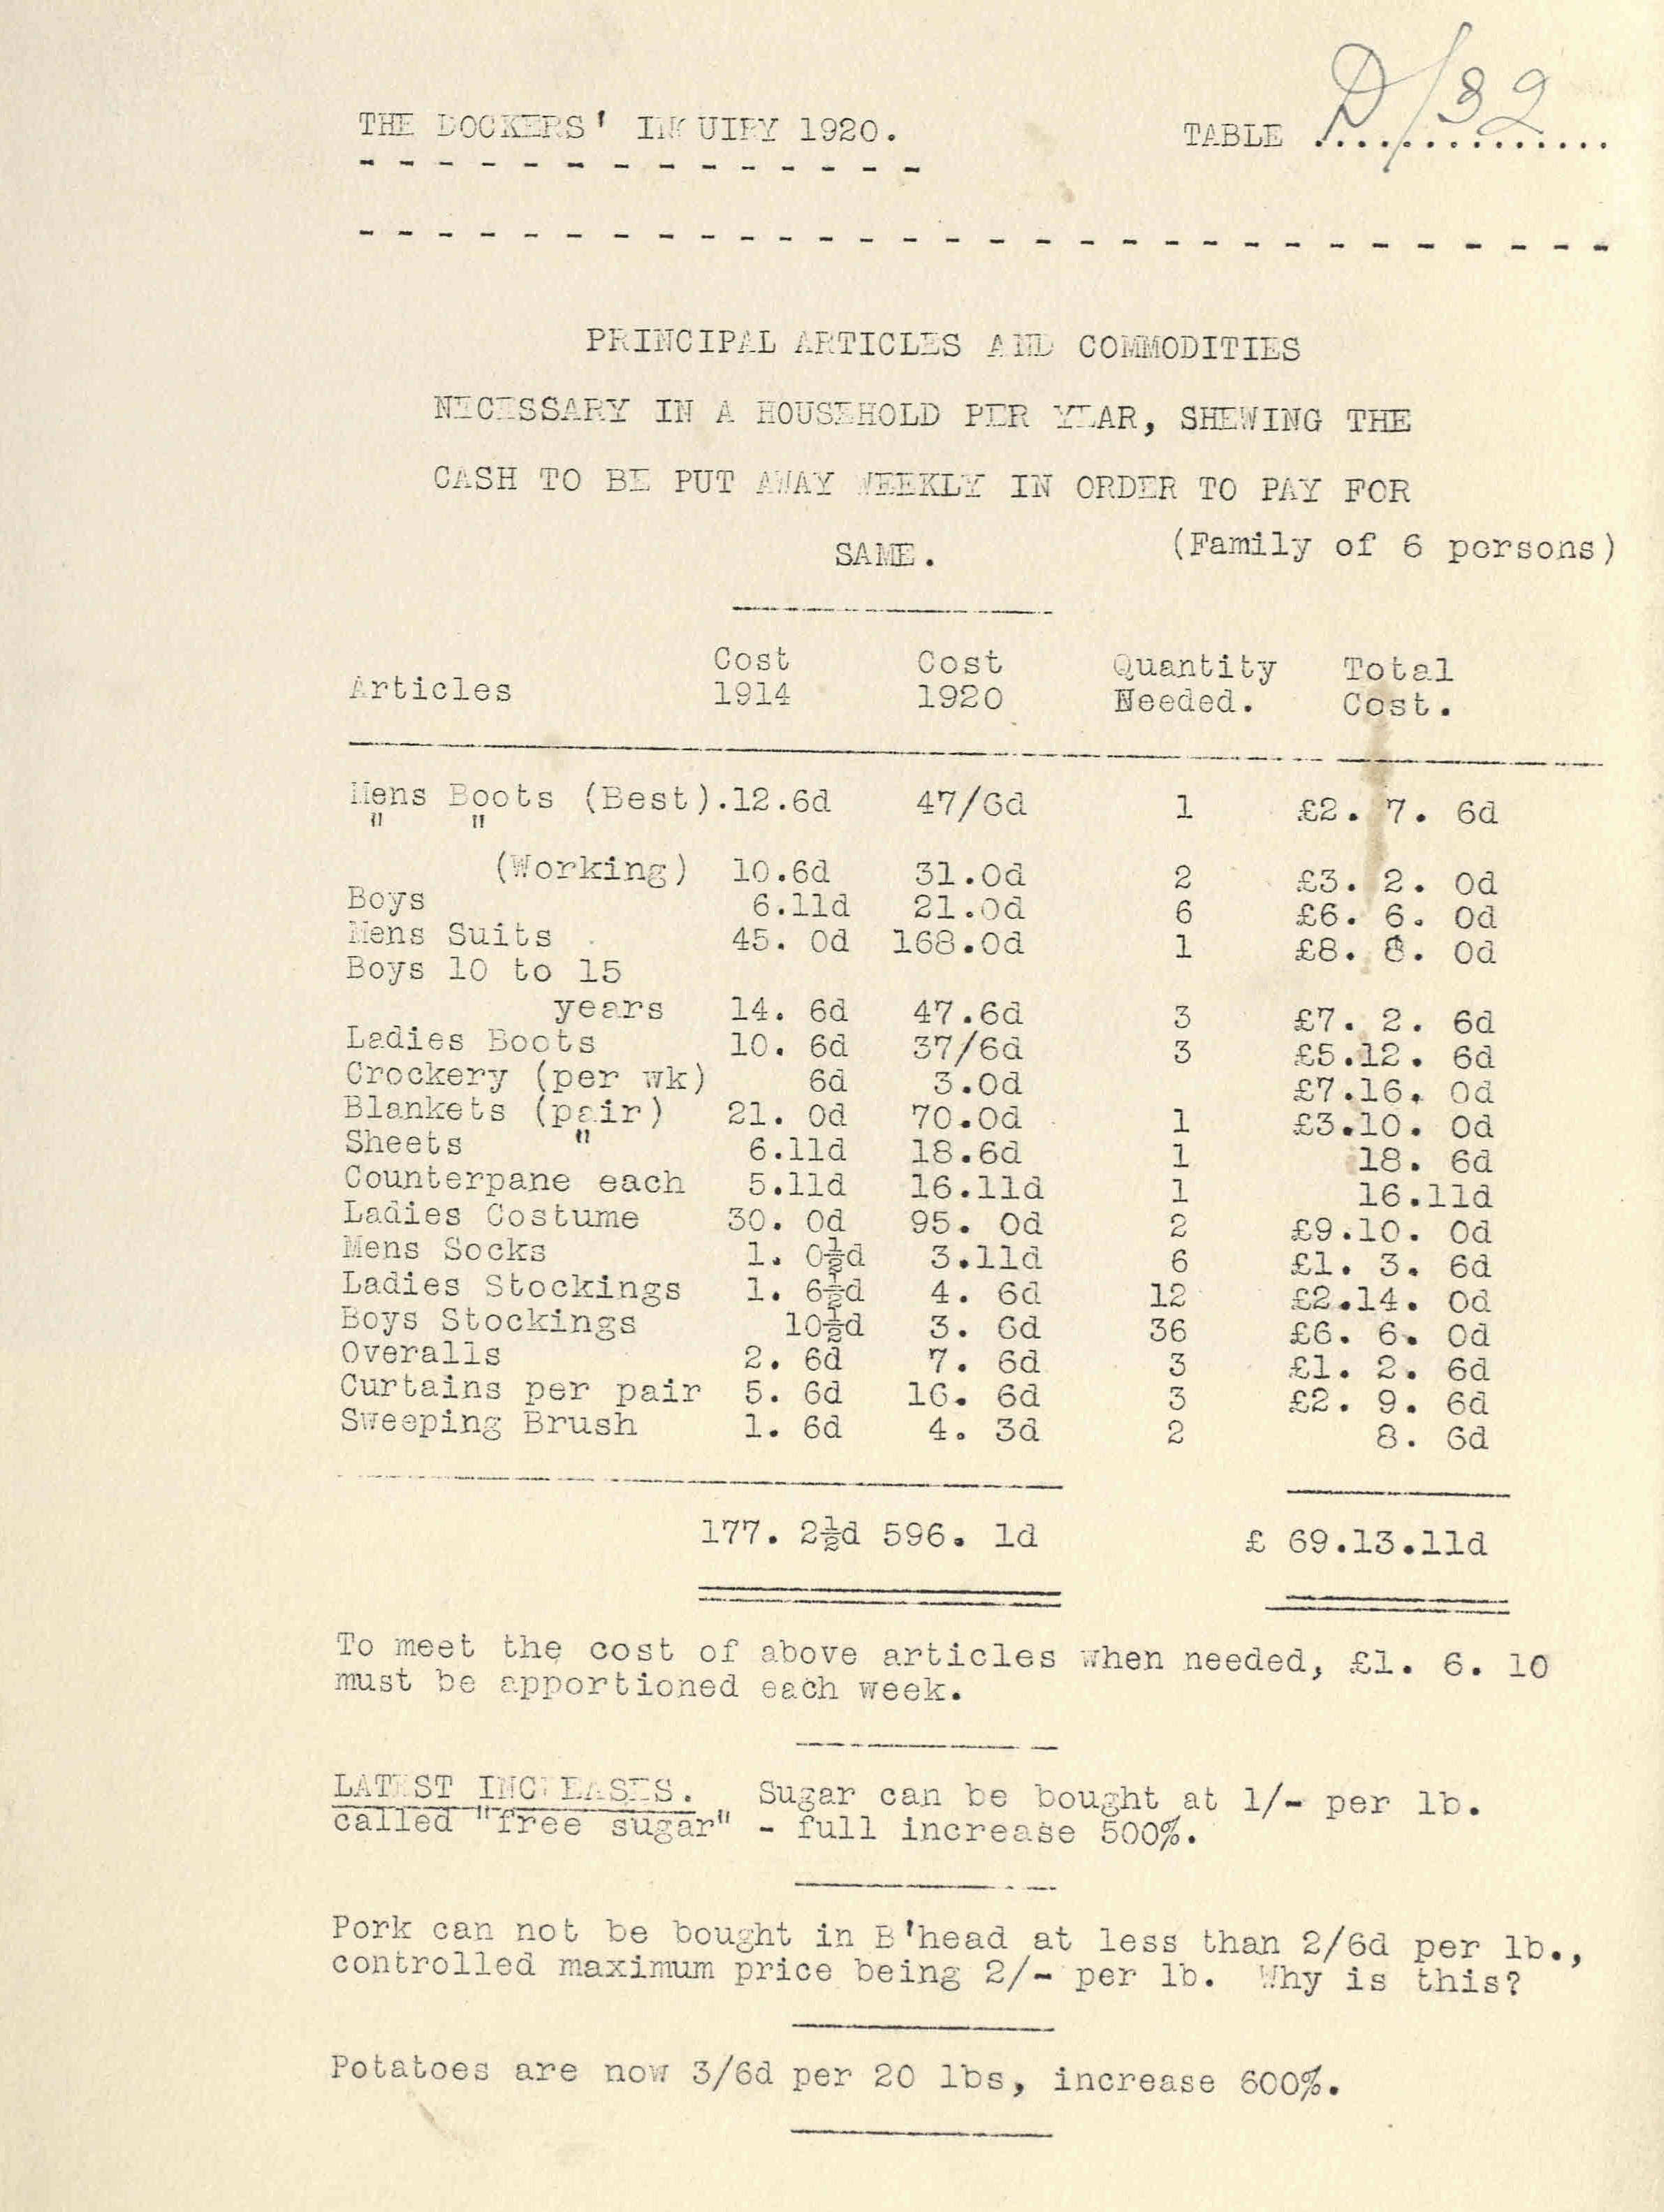 Yearly budget for clothing and other household items in 1914 and 1920